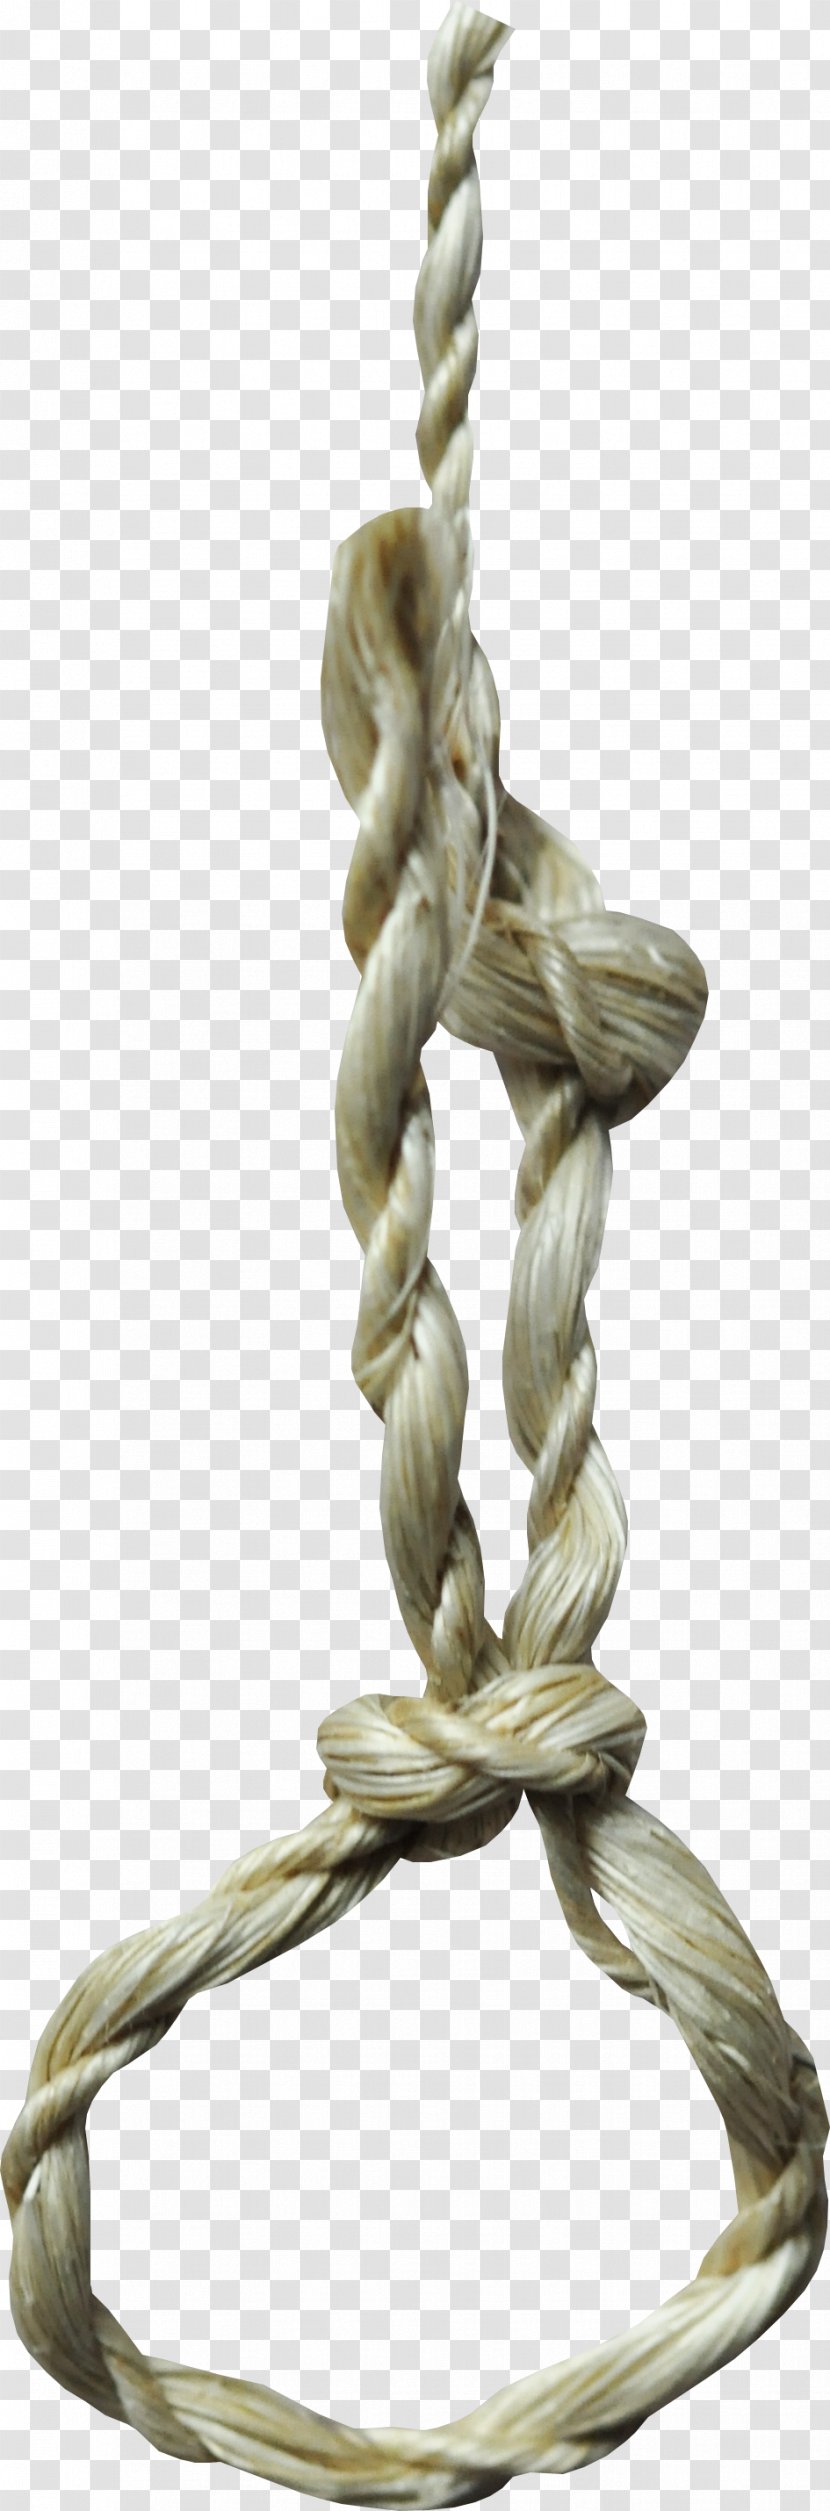 Rope - Pretty Transparent PNG